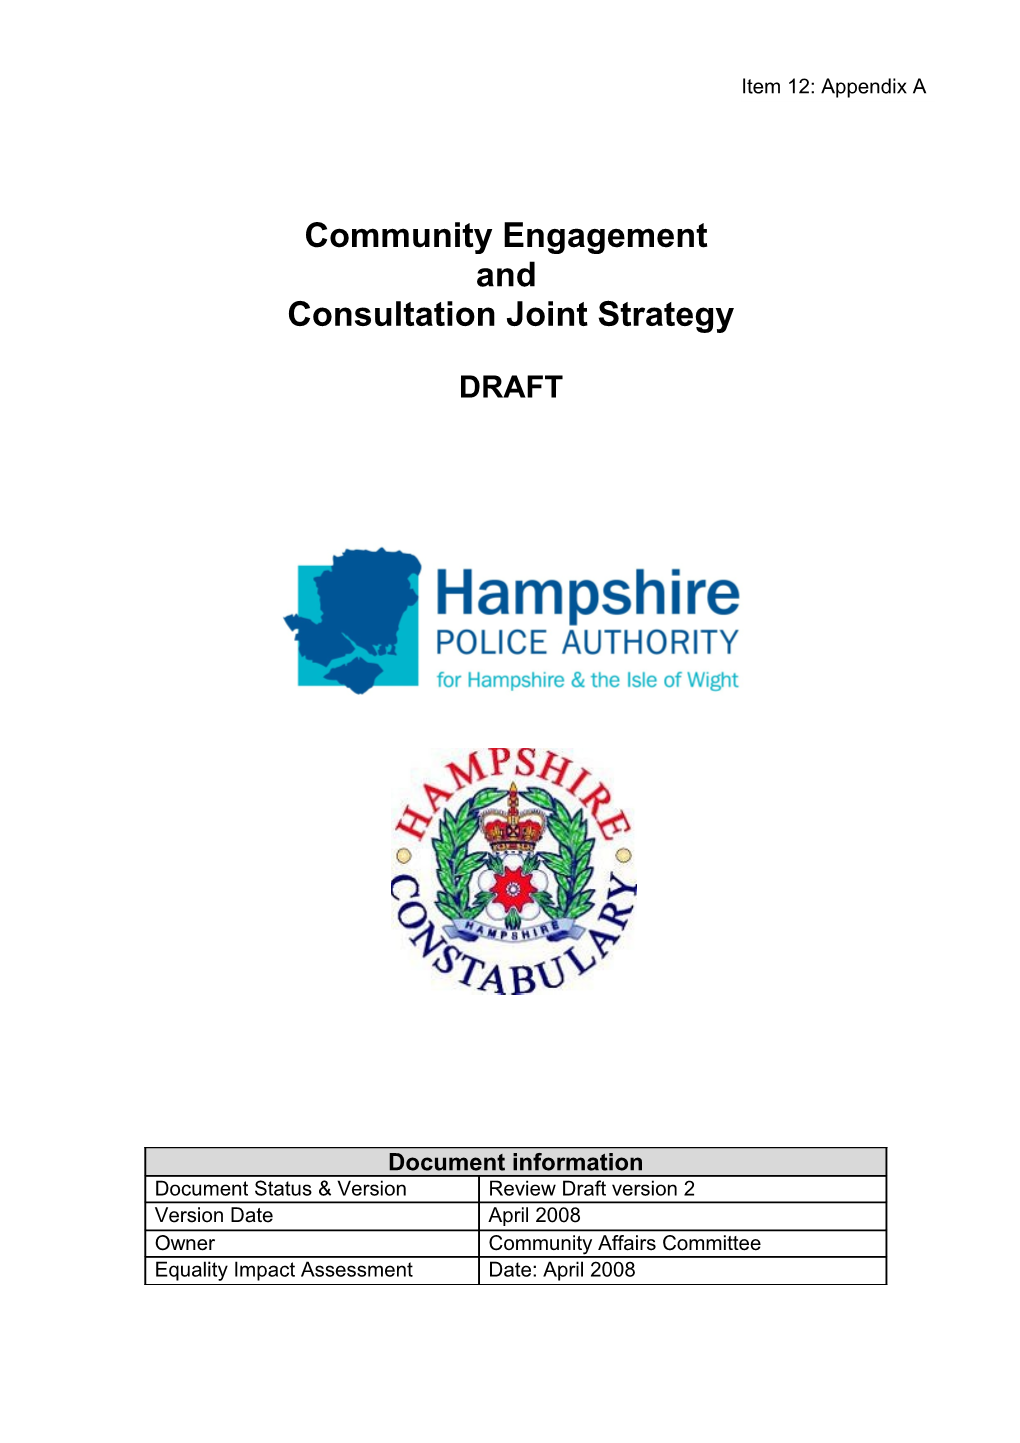 Community Engagement and Consultation Strategy